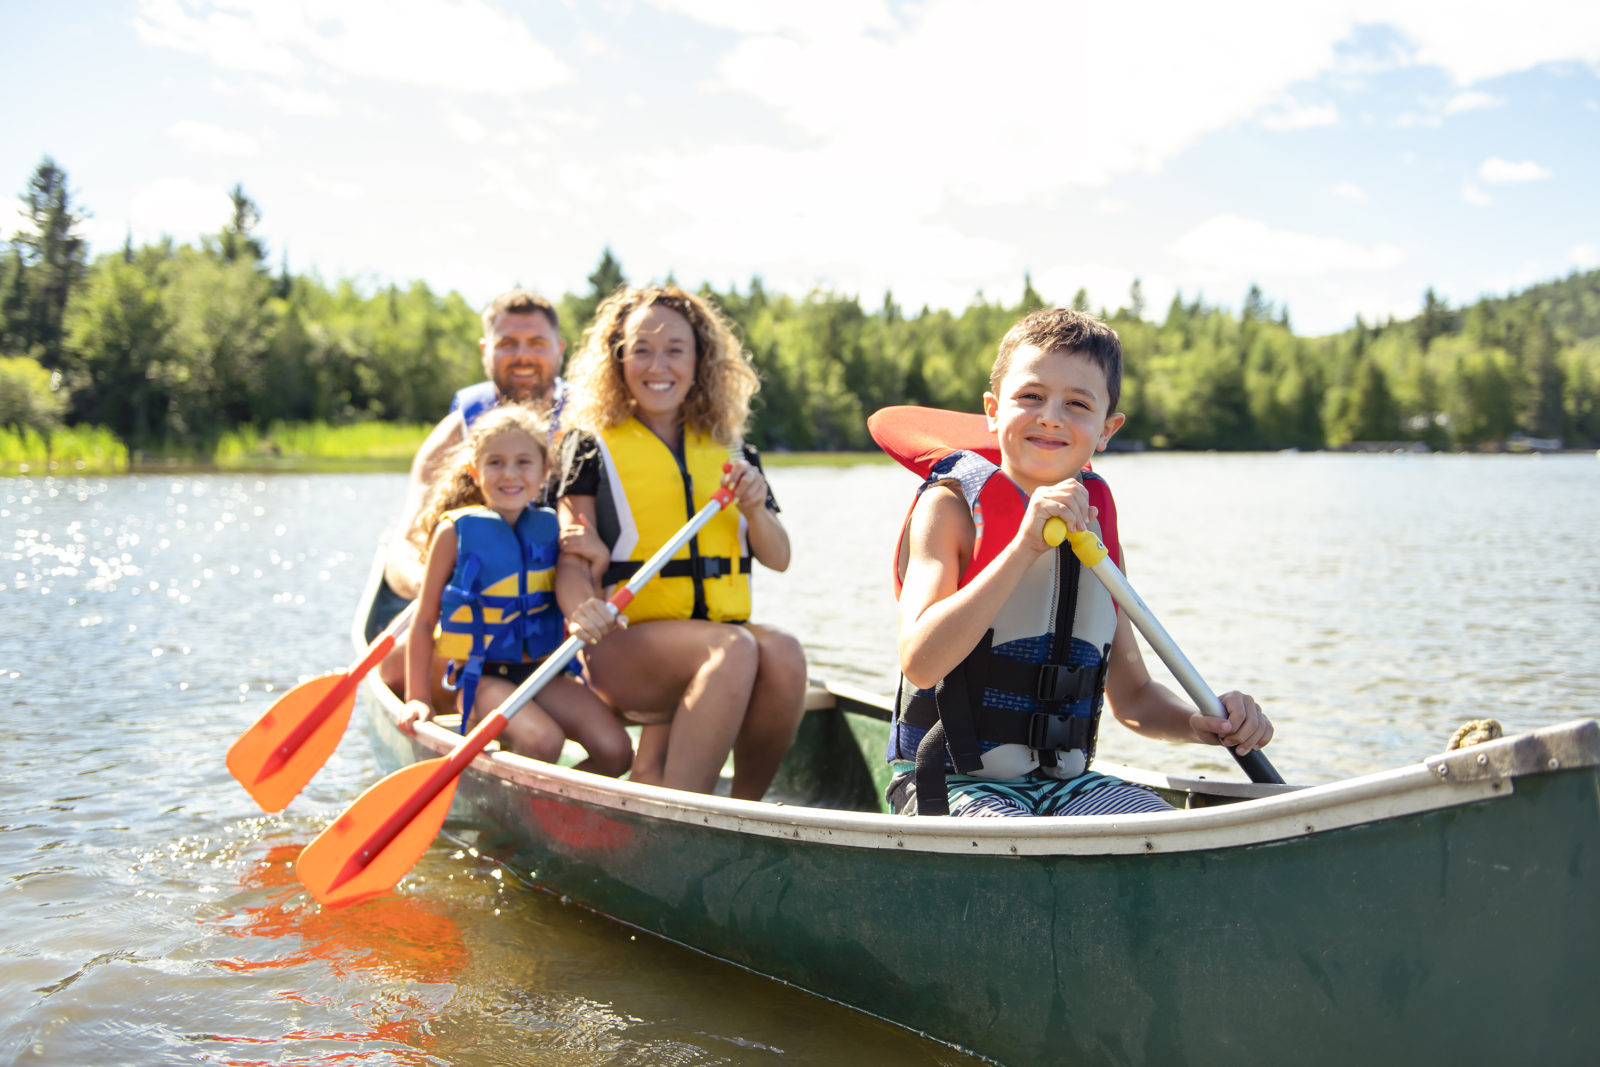 A family in a canoe on a lake. Make water safety your priority. LCA